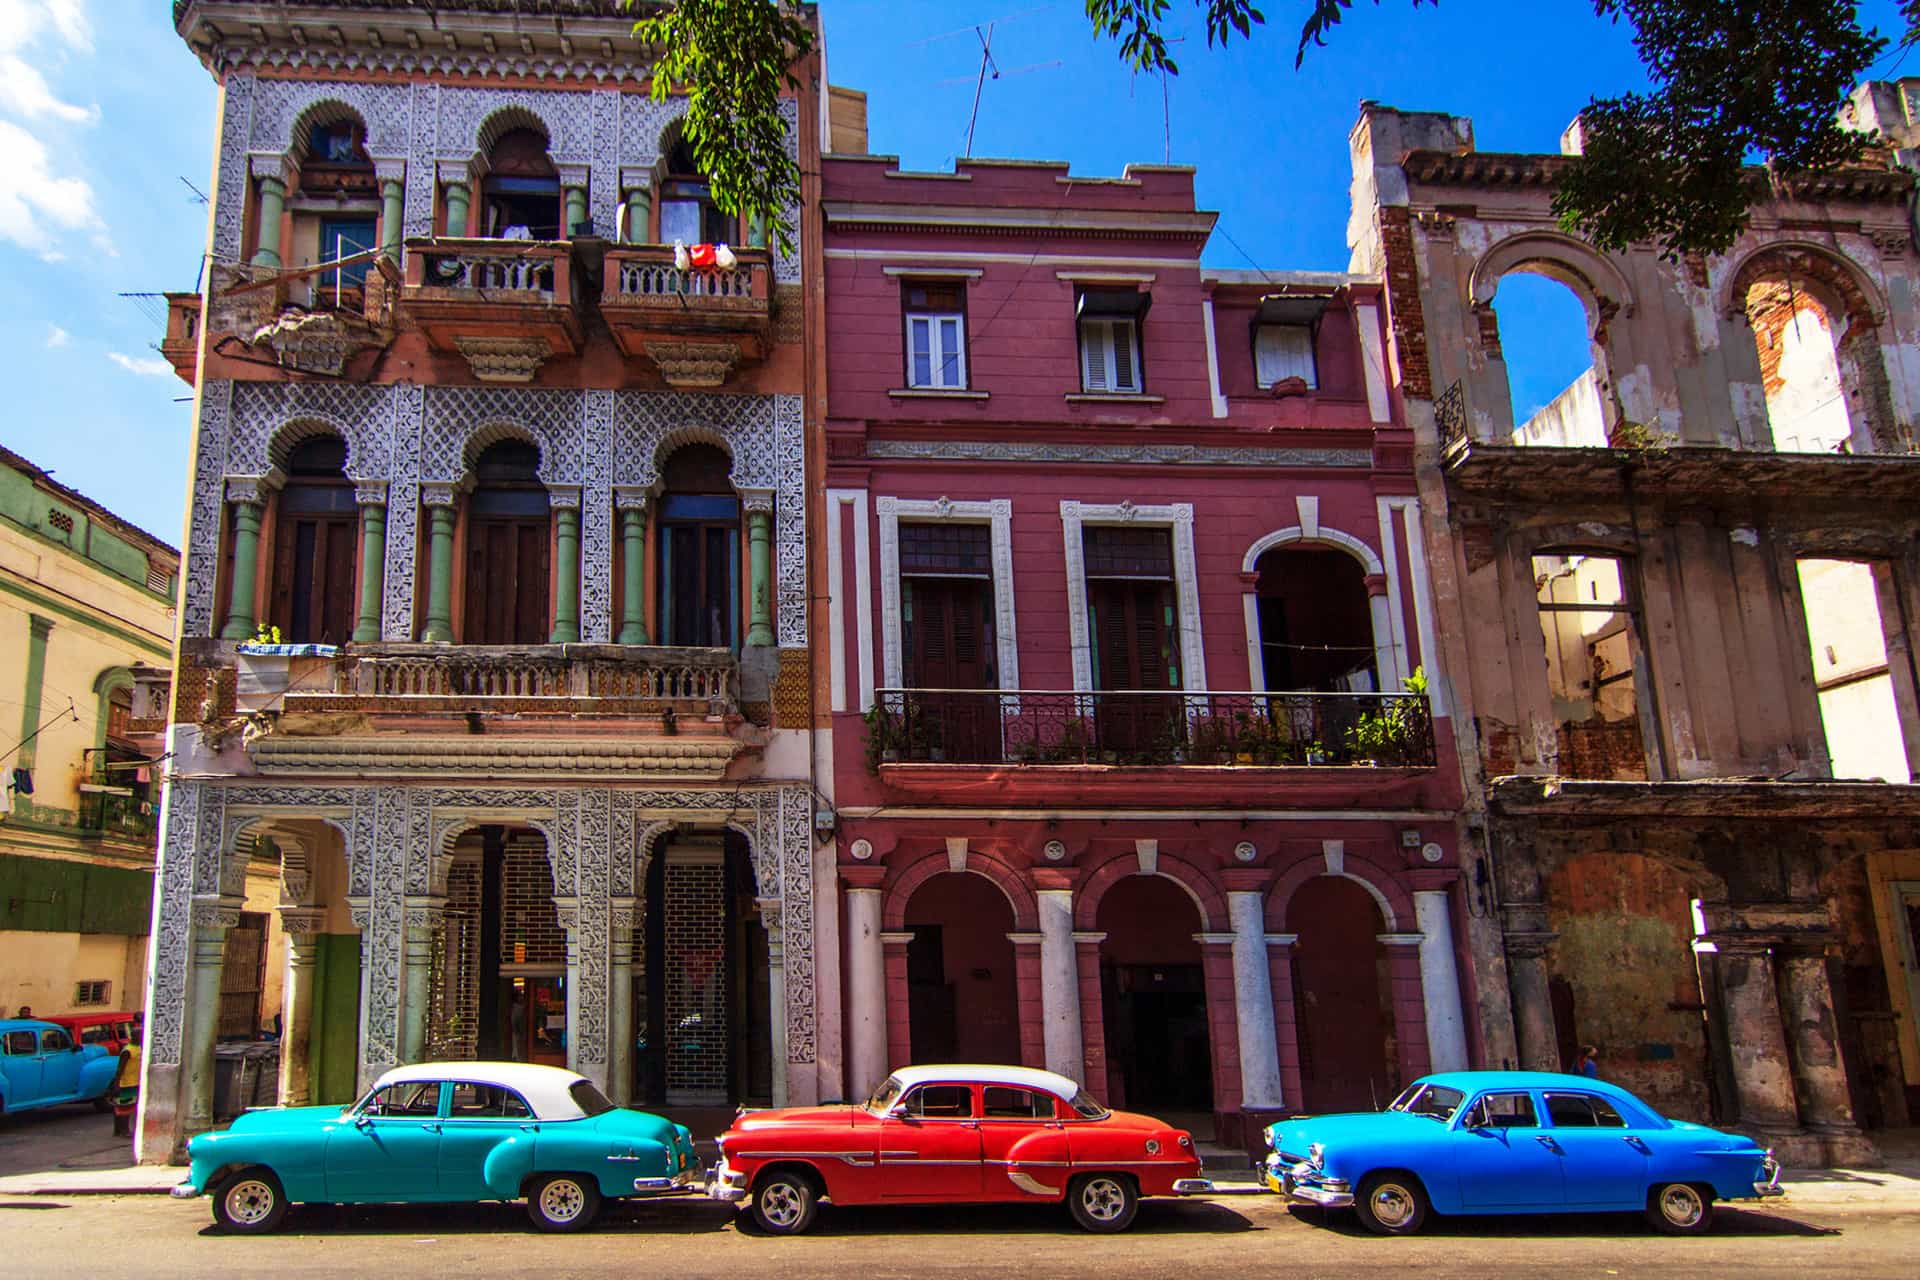 Cuba has become a mecca for vintage car lovers.